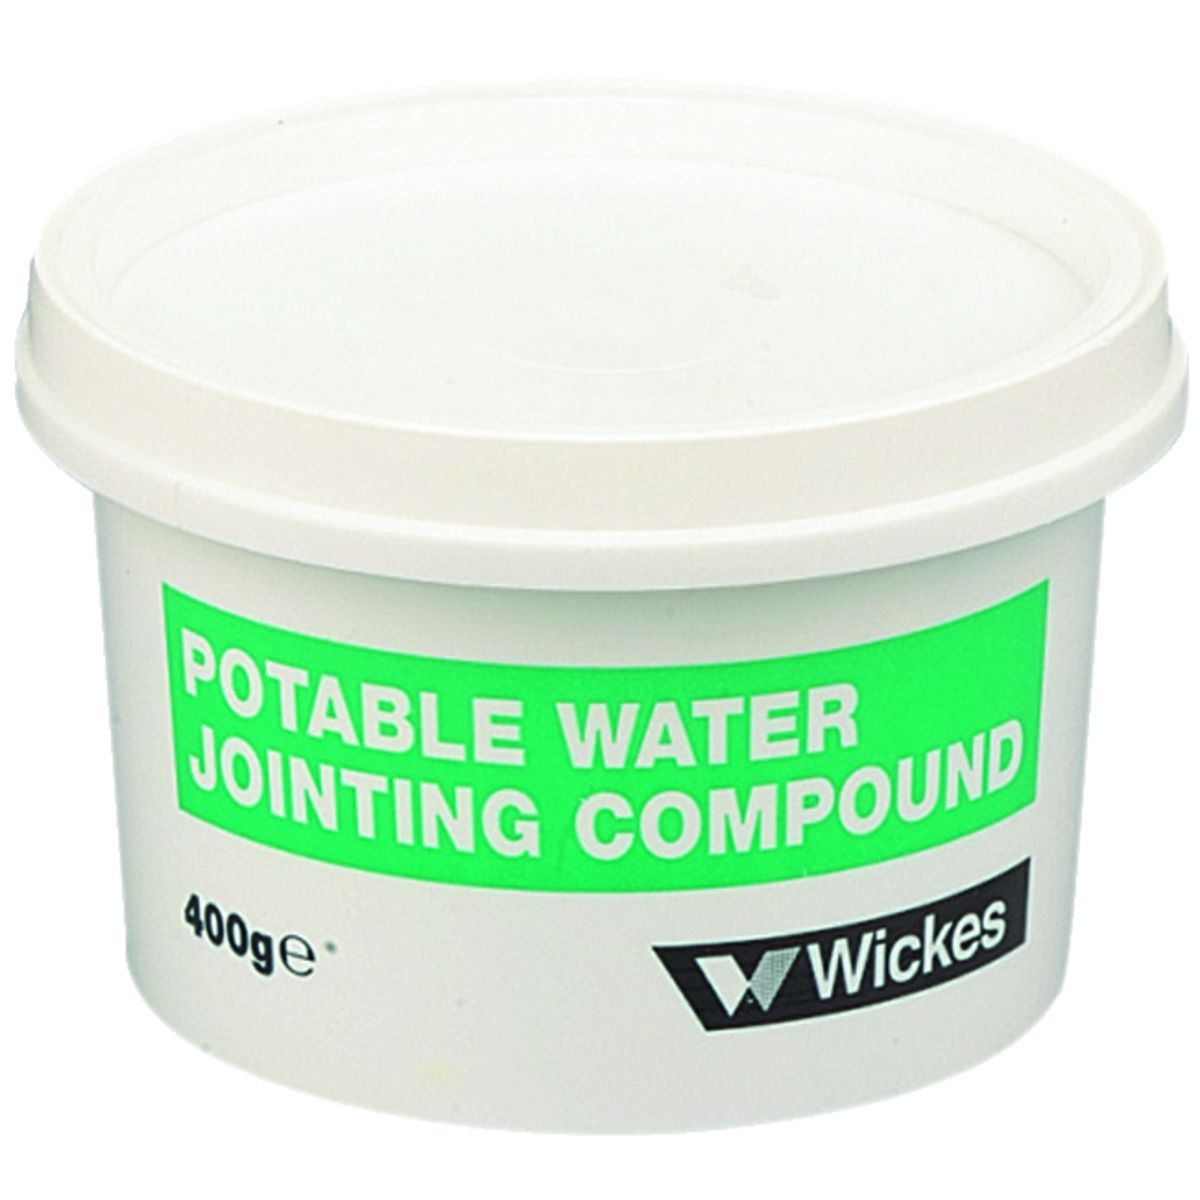 Image of Wickes Potable Water System Jointing Compound - 400g